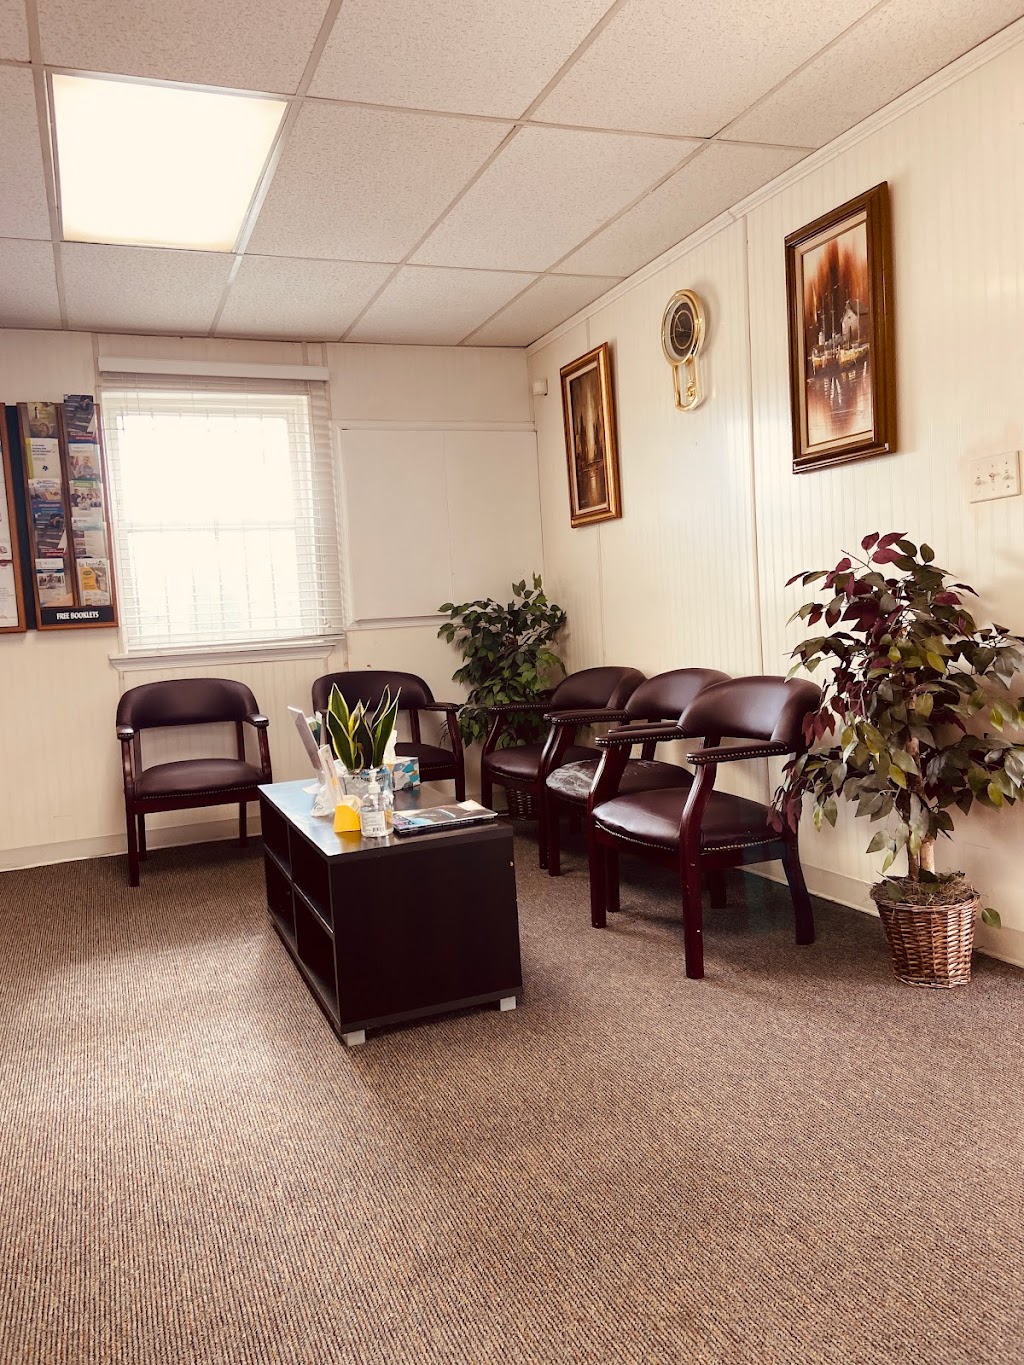 Valley Forge Urgent Care & Family Medical Center | 2521 W Main St, Norristown, PA 19403 | Phone: (610) 539-3221